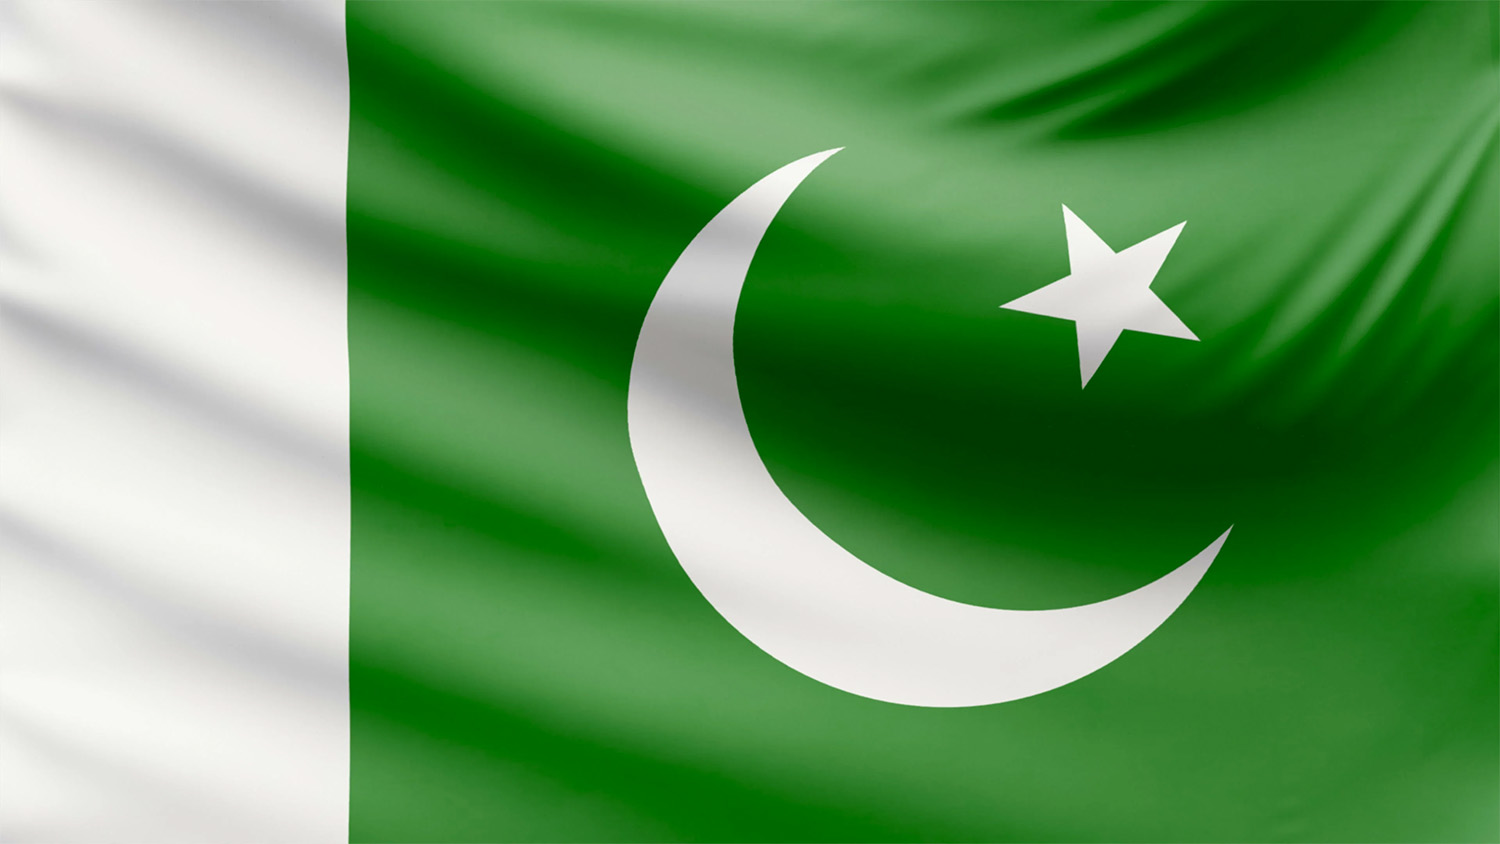 40 interesting facts about Pakistan